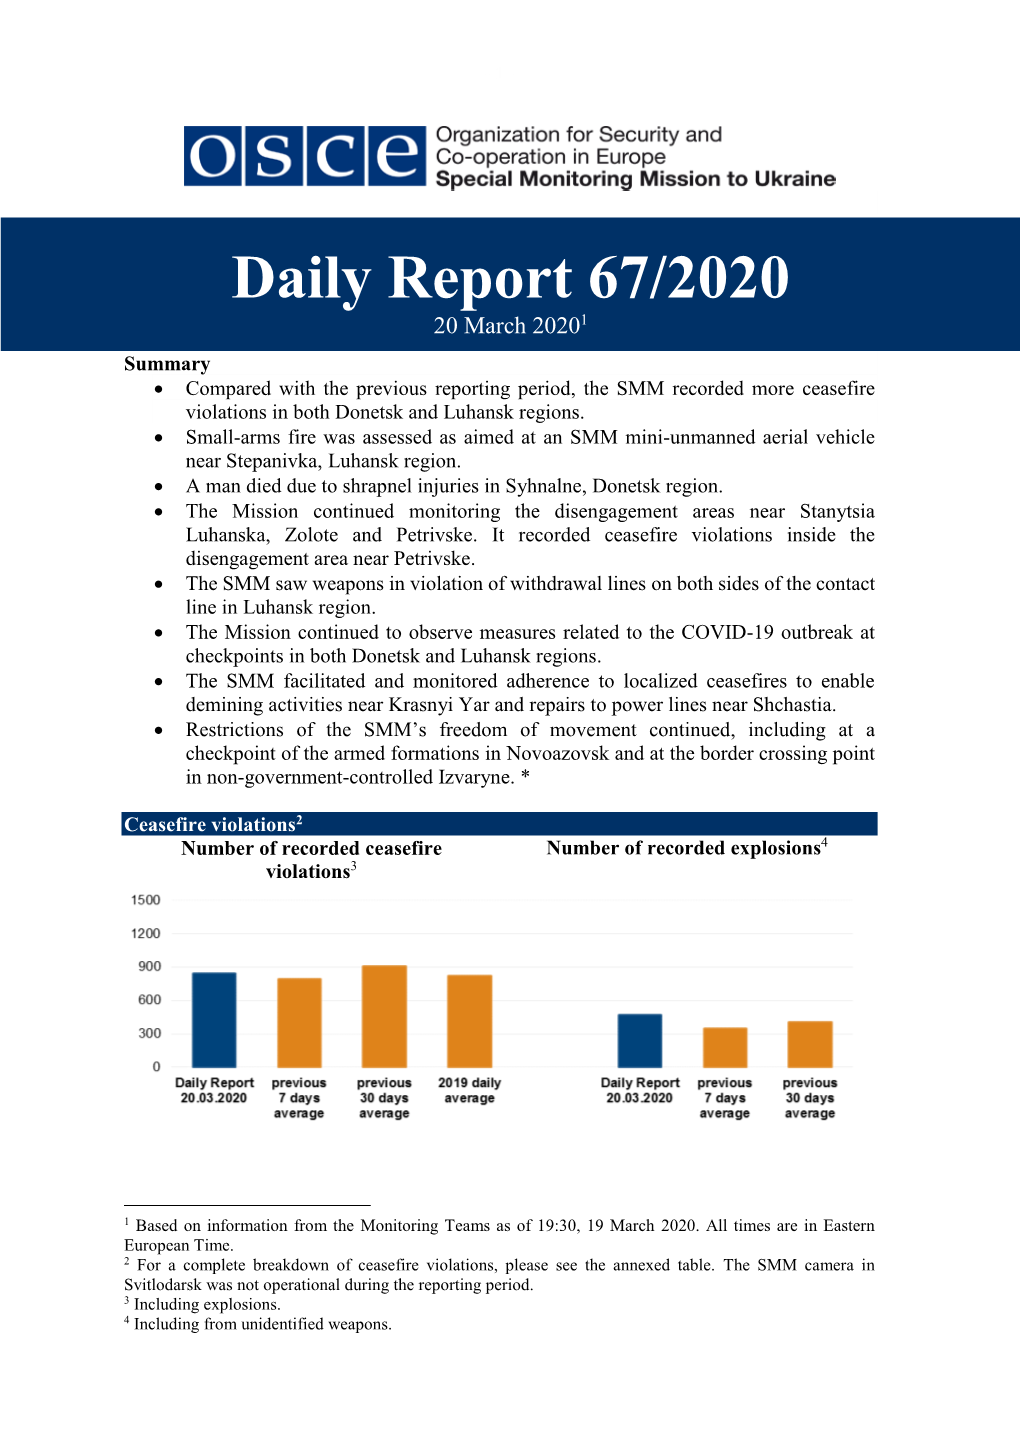 SMM Daily Report 20 March 2020